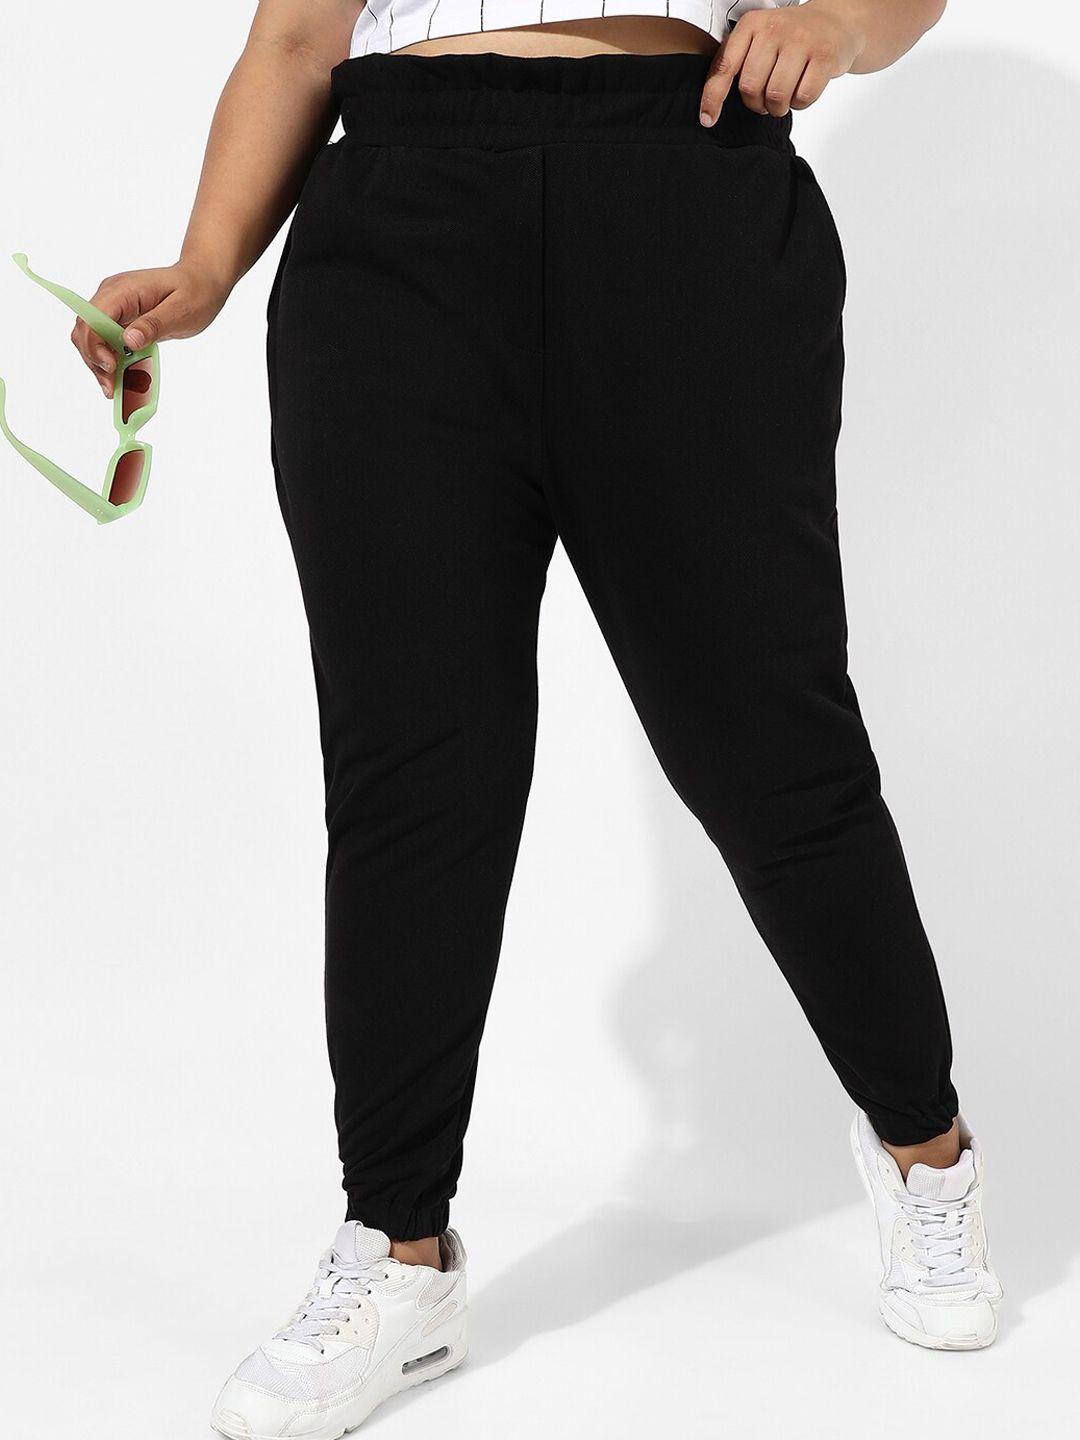 Instafab Plus Plus Size Women Mid-Rise Relaxed-Fit Cotton Joggers